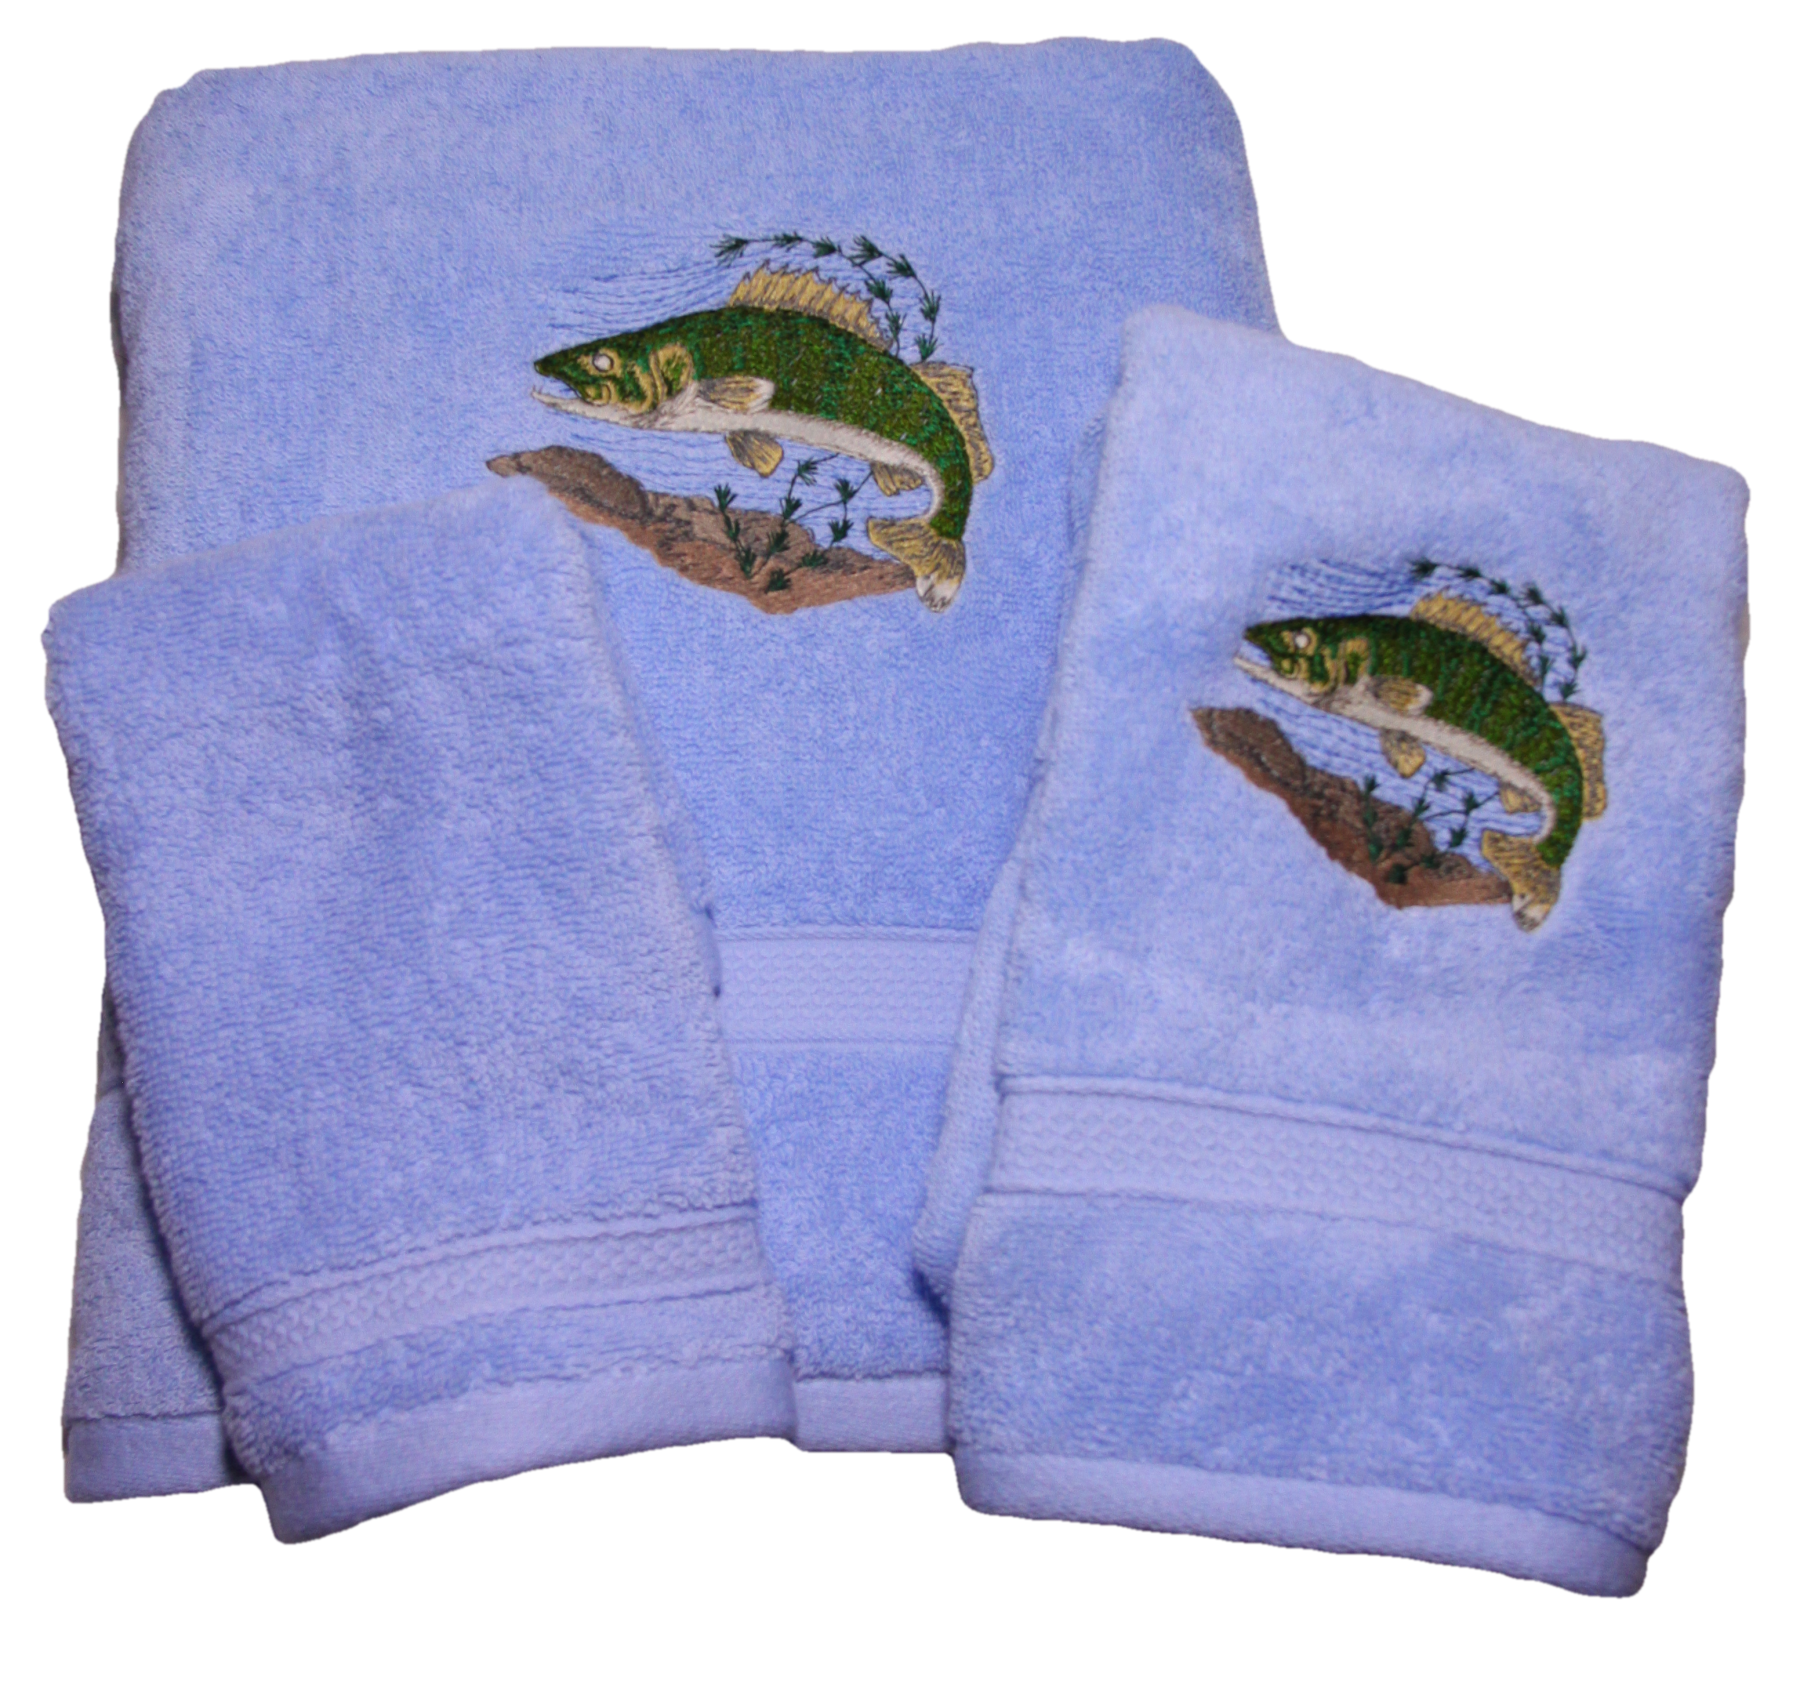 Fly Fishing Bass Born to Fish Embroidered Towels Choose Your Size of Set  and Towel Color Bath Sheet, Bath Towel, Hand Towel & Washcloth 